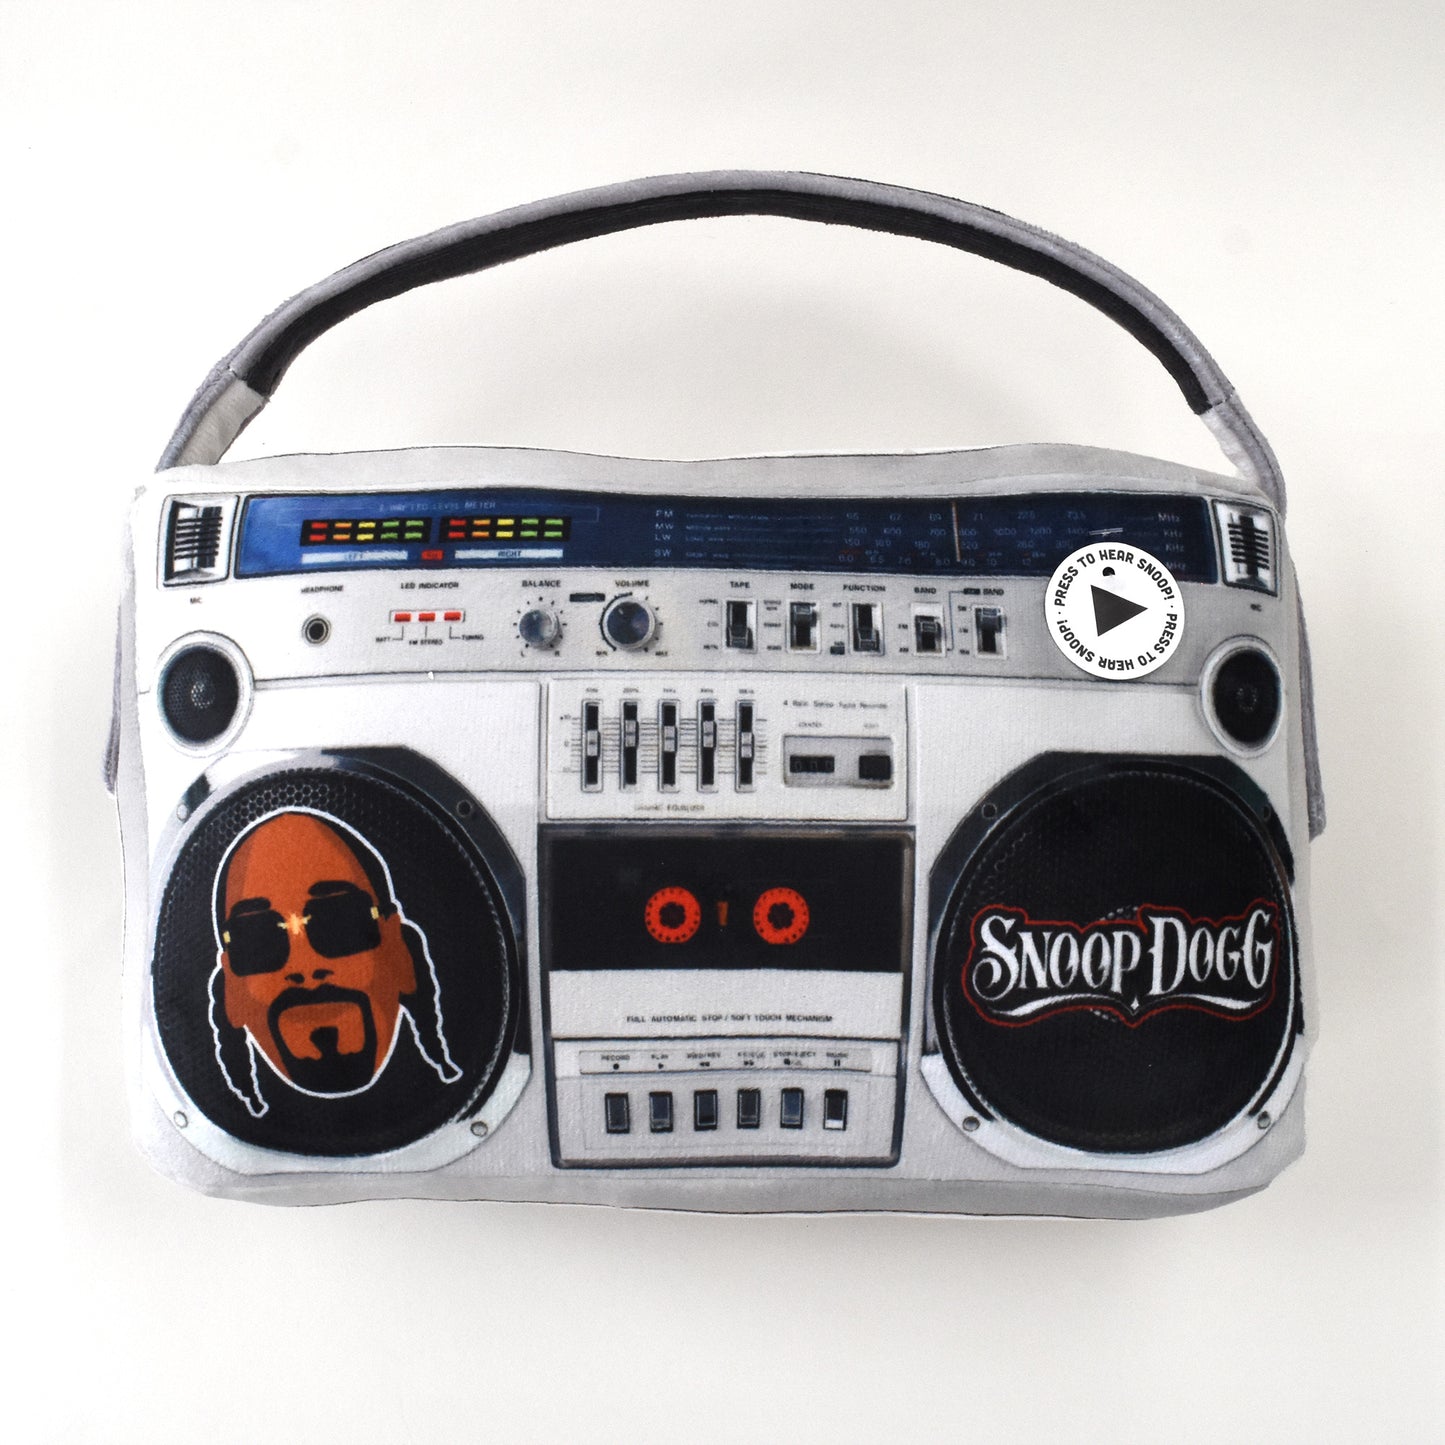 Product flat lay of the front of the Deluxe Boom Box Pet Toy.